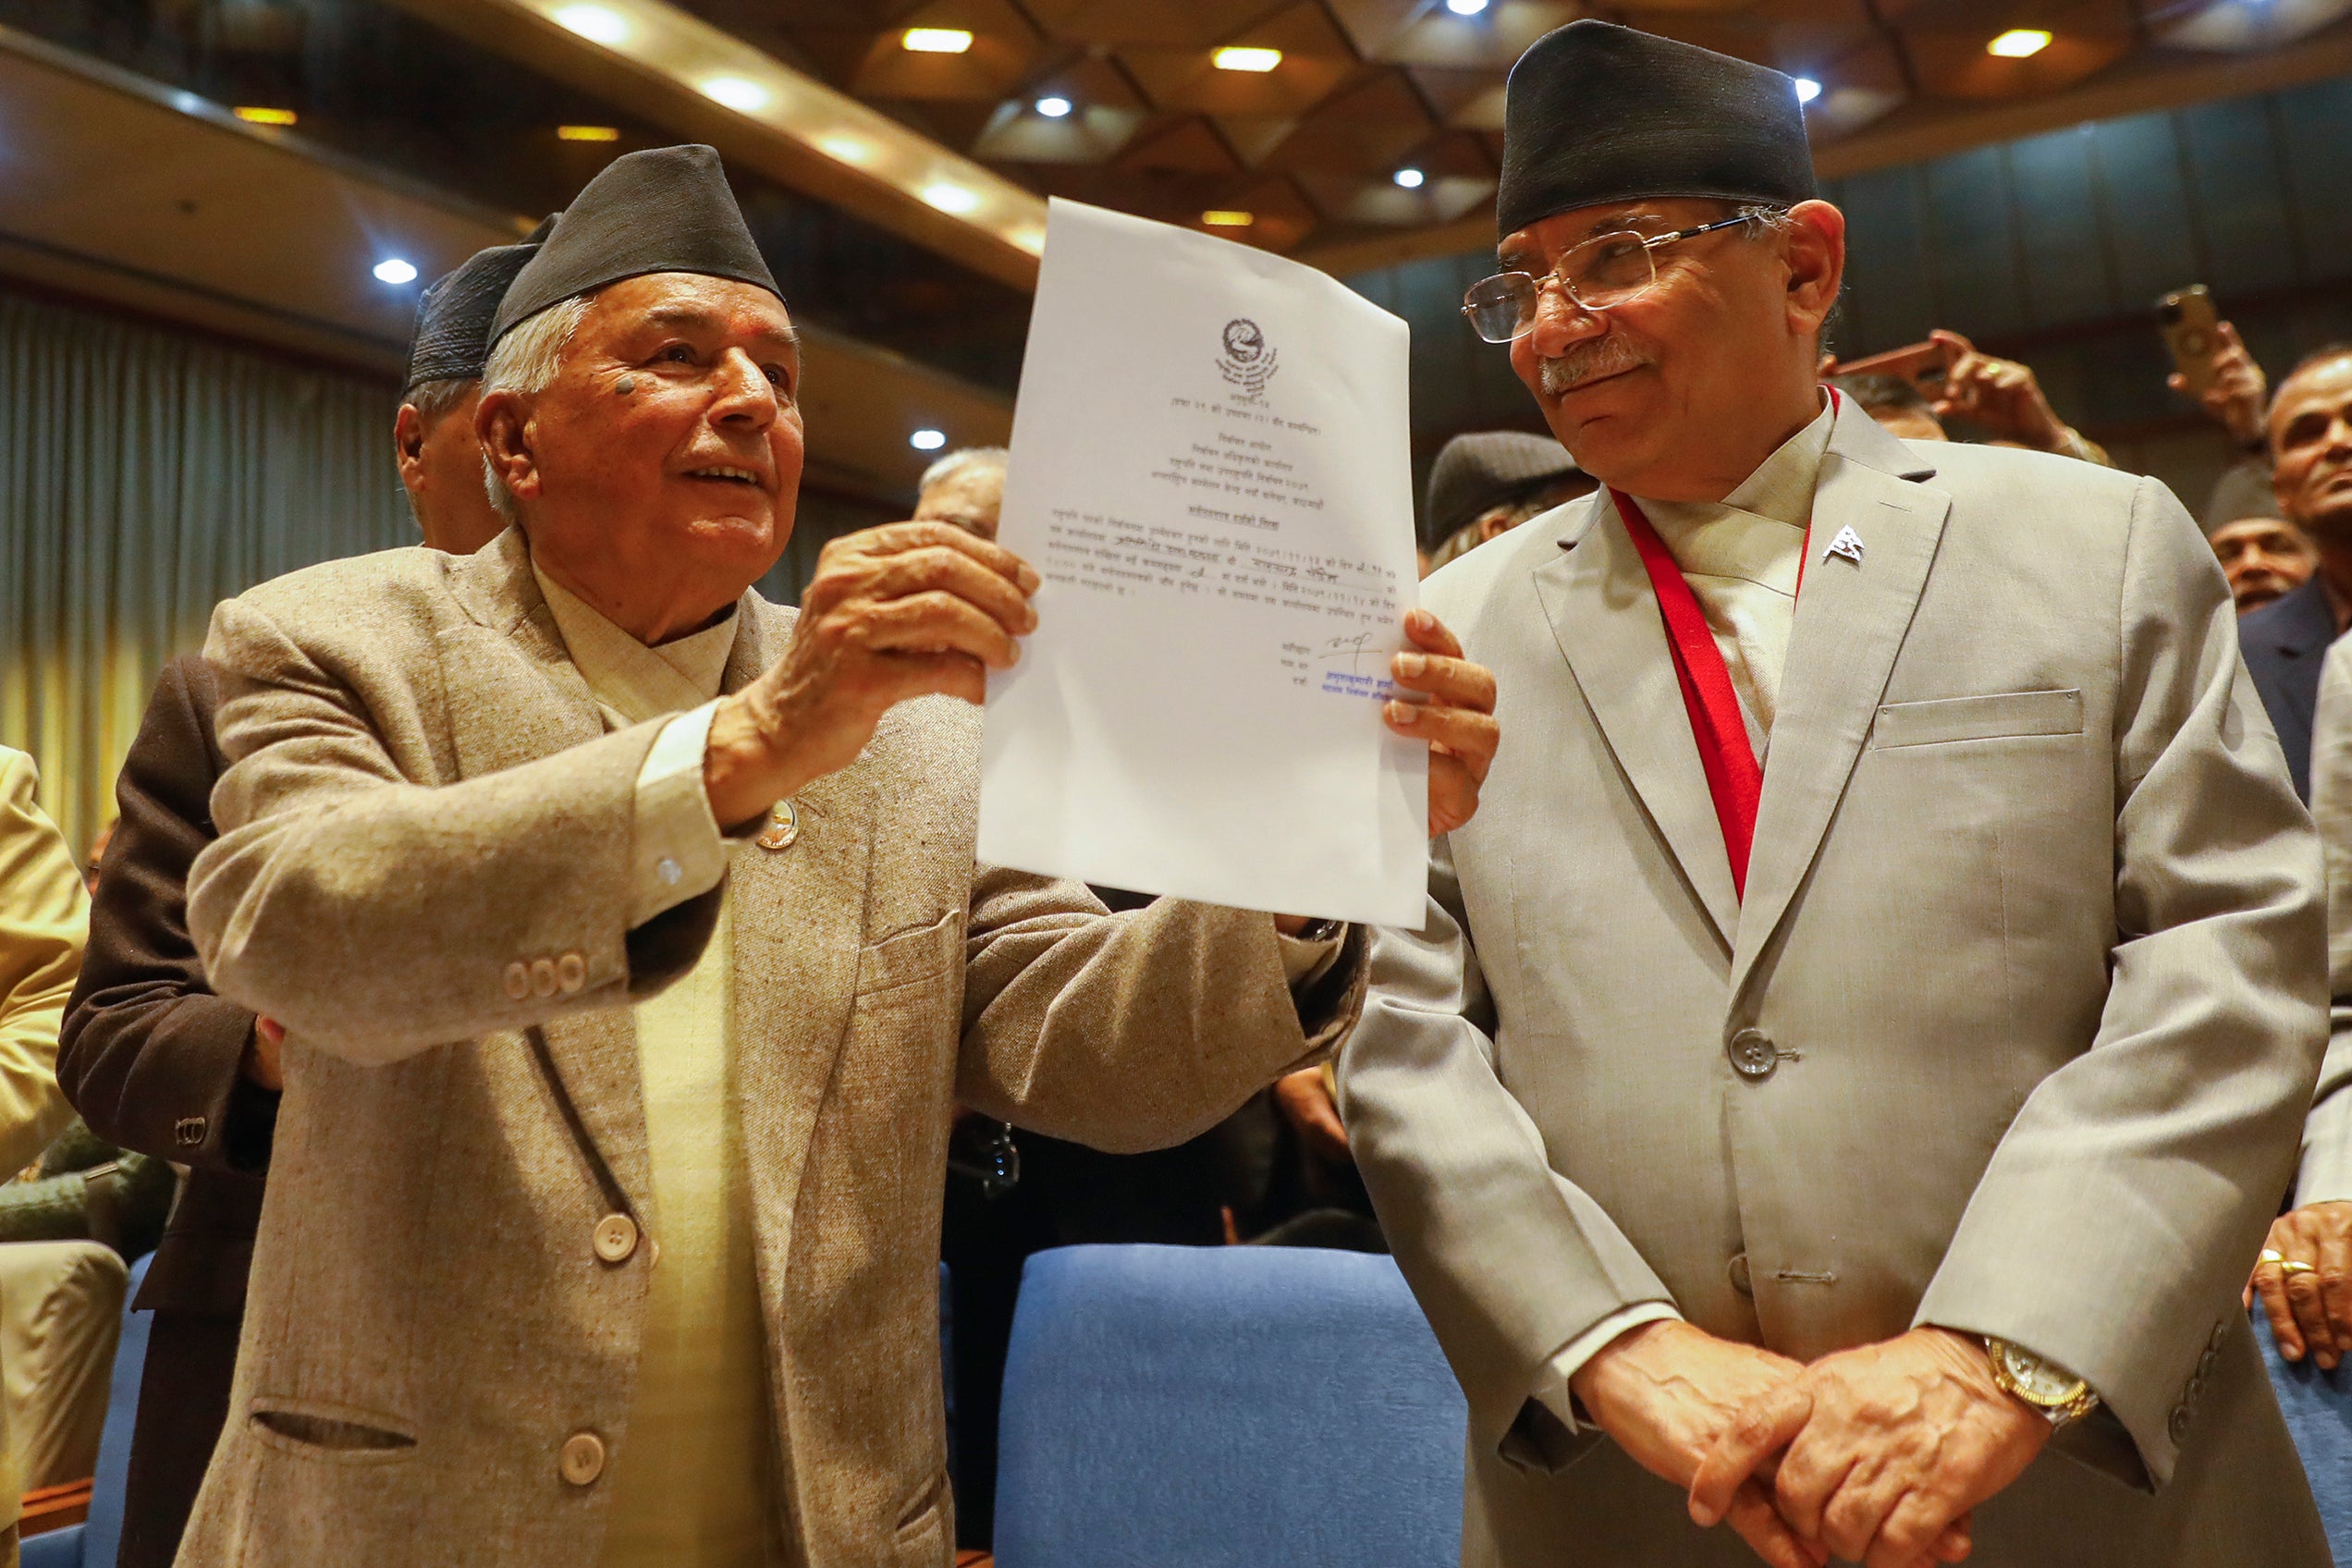 File. Nepalese Prime Minister Pushpa Kamal Dahal, right, looks on as Ram Chandra Poudel of the Nepali Congress party, left, shows his candidacy papers after filling his nomination to become Nepal's next president as in Kathmandu, Nepal, Saturday, 25 February 2023